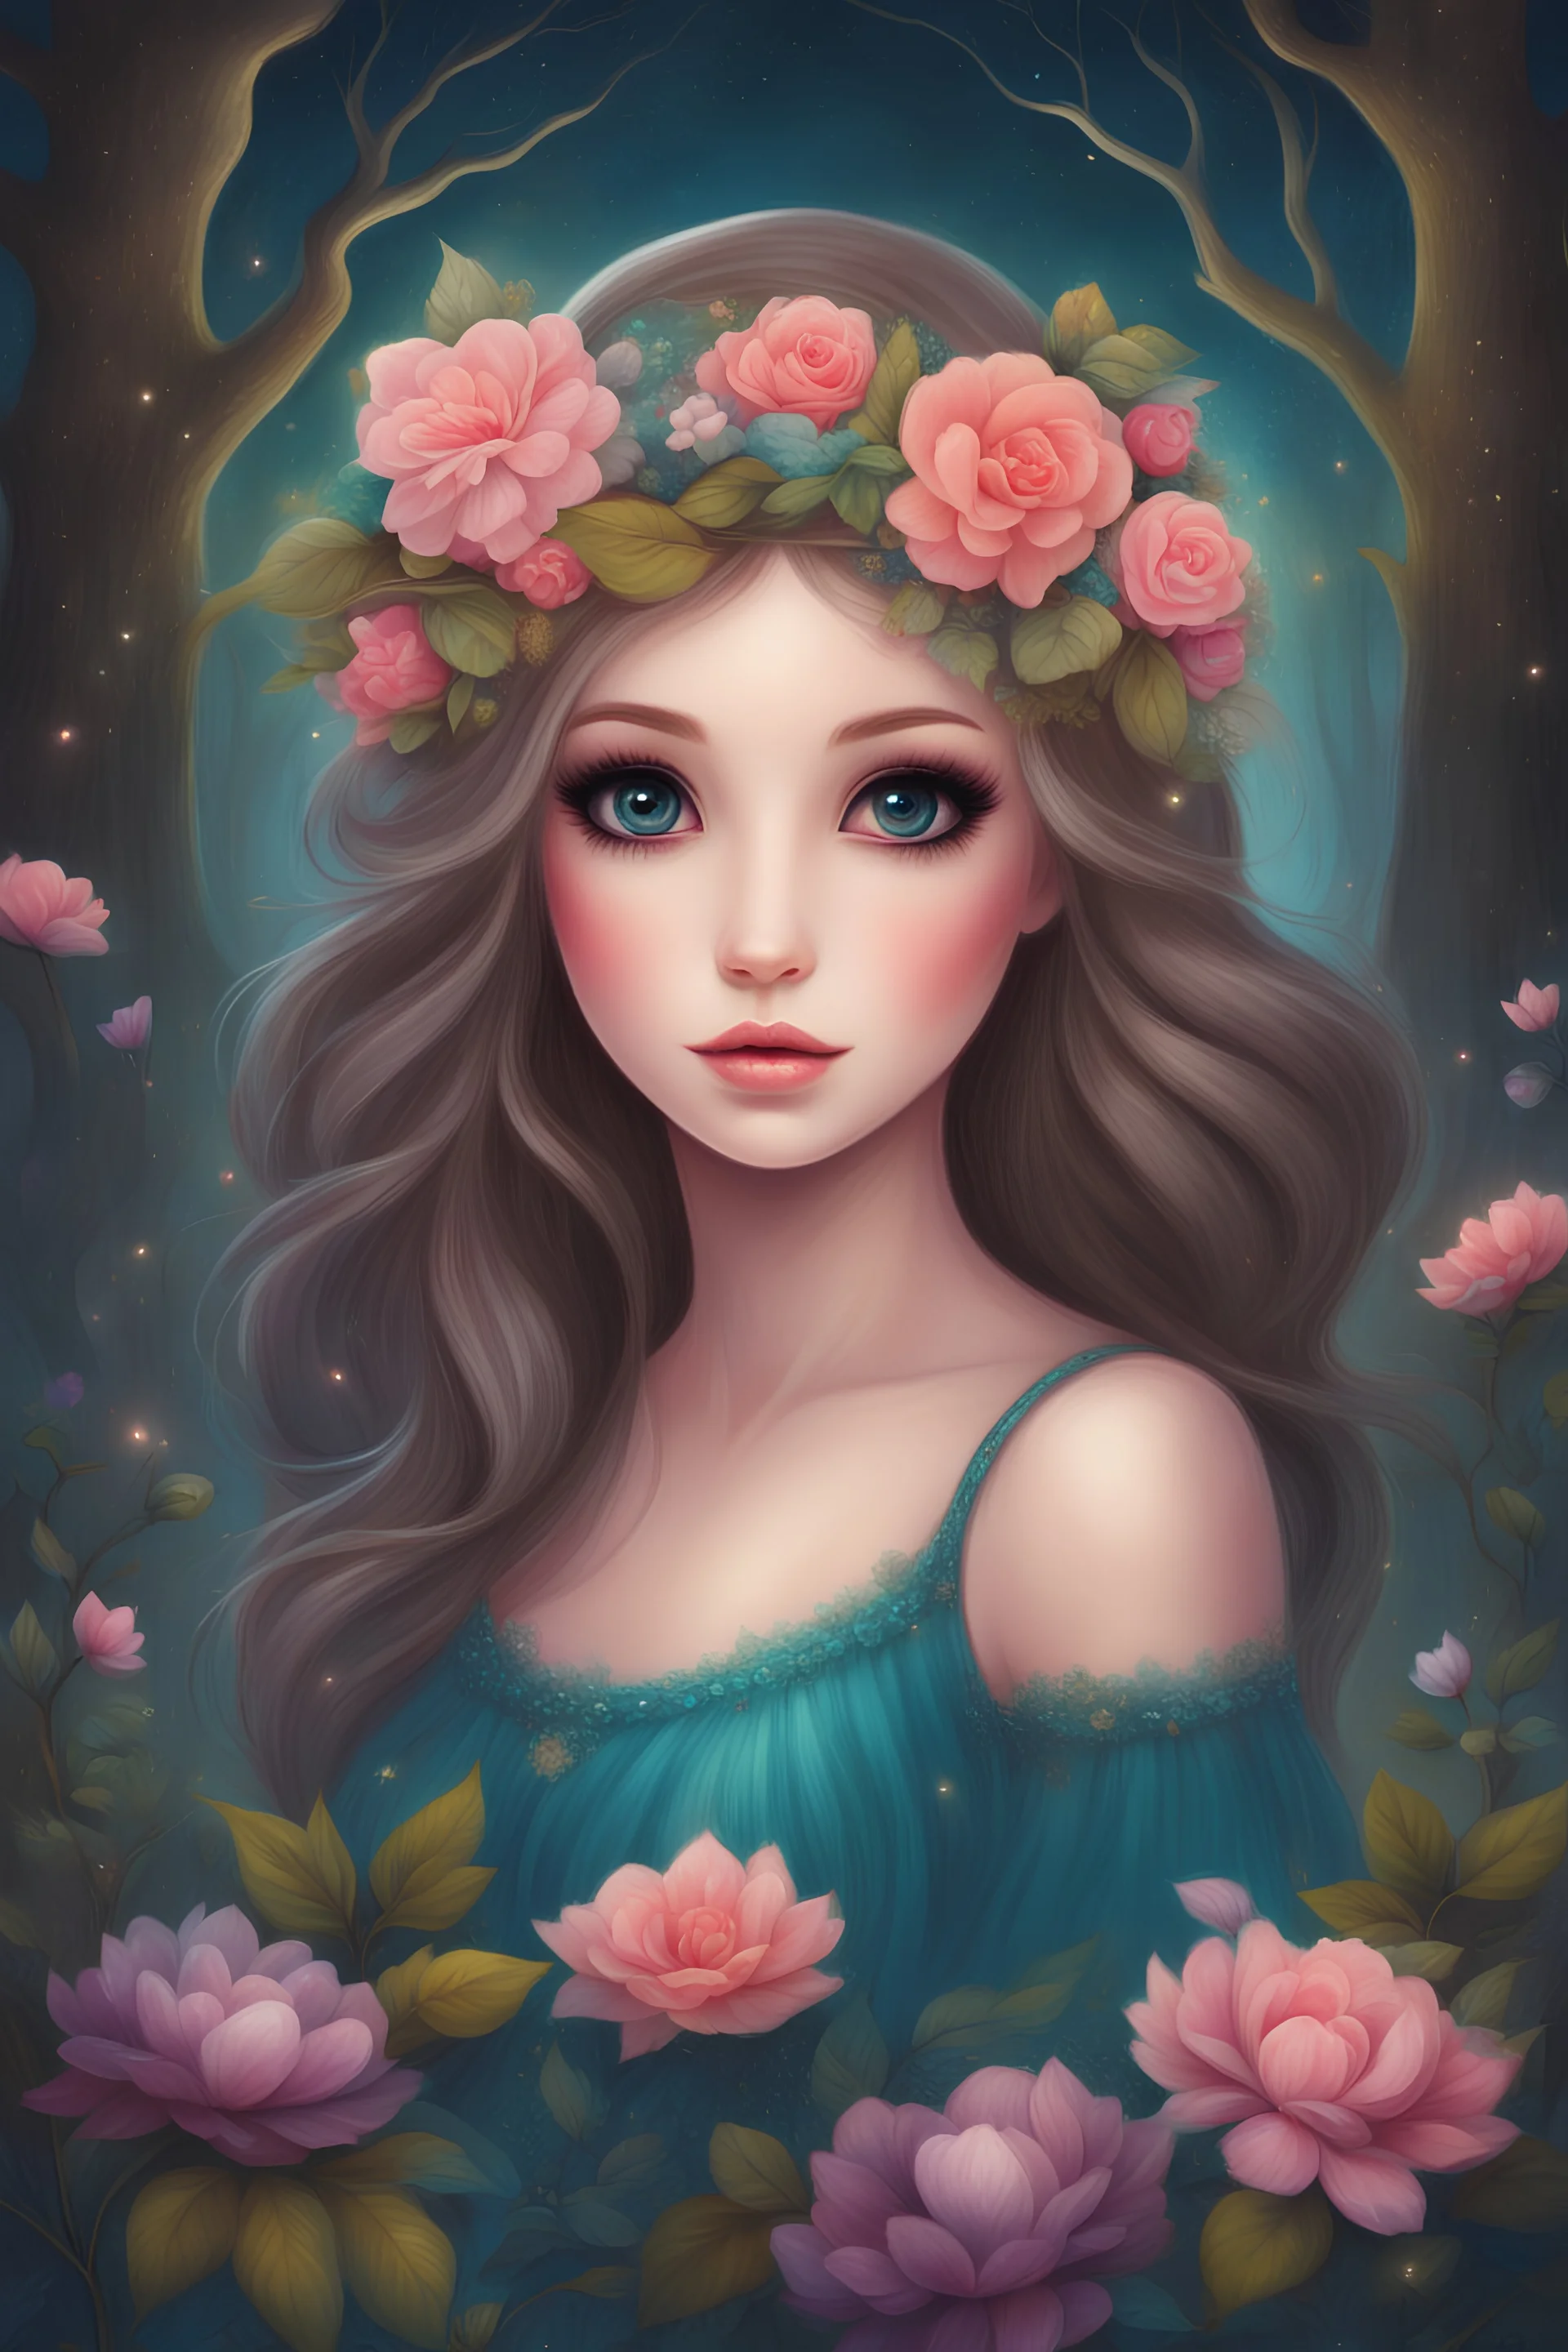 Painting of a beautiful girl, beautiful, haunted forest, flowers on her head, glitter dress, young girl, digital painting, fantasy art, pretty face, inspired by Jeremiah Ketner, illustration, anime portrait, barbie face, big eyes, bright eyes, dream, trees, forest background, dark night, song, glitters background, fantasy, high quality, 8k